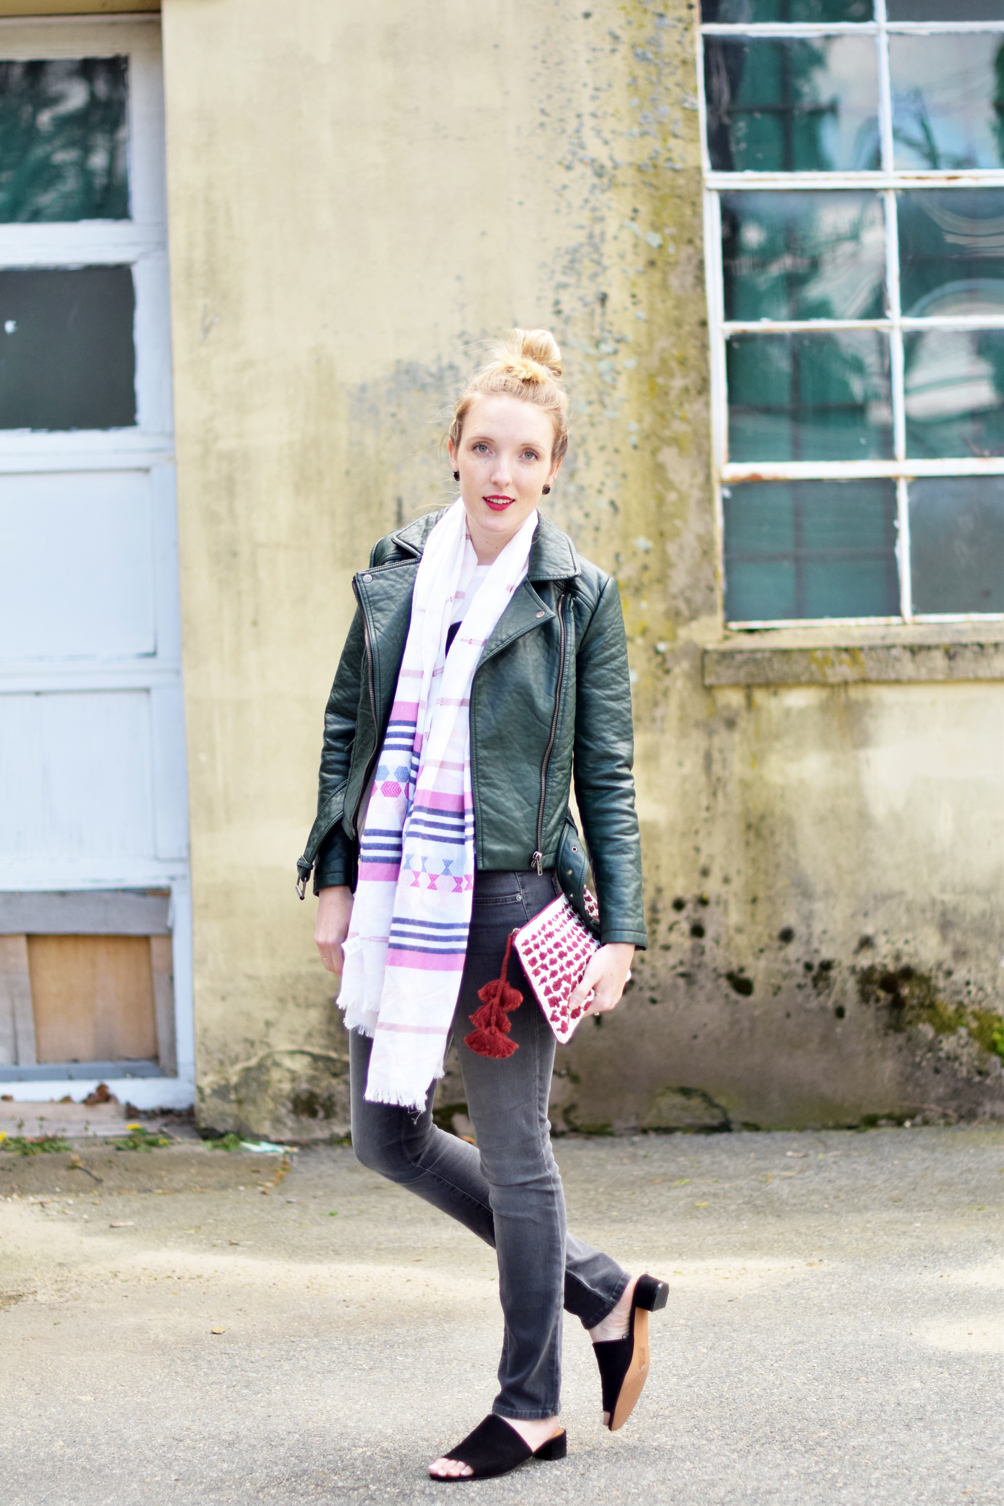 spring outerwear, emerald moto jacket with a graphic tee and printed scarf - leslie musser, one brass fox